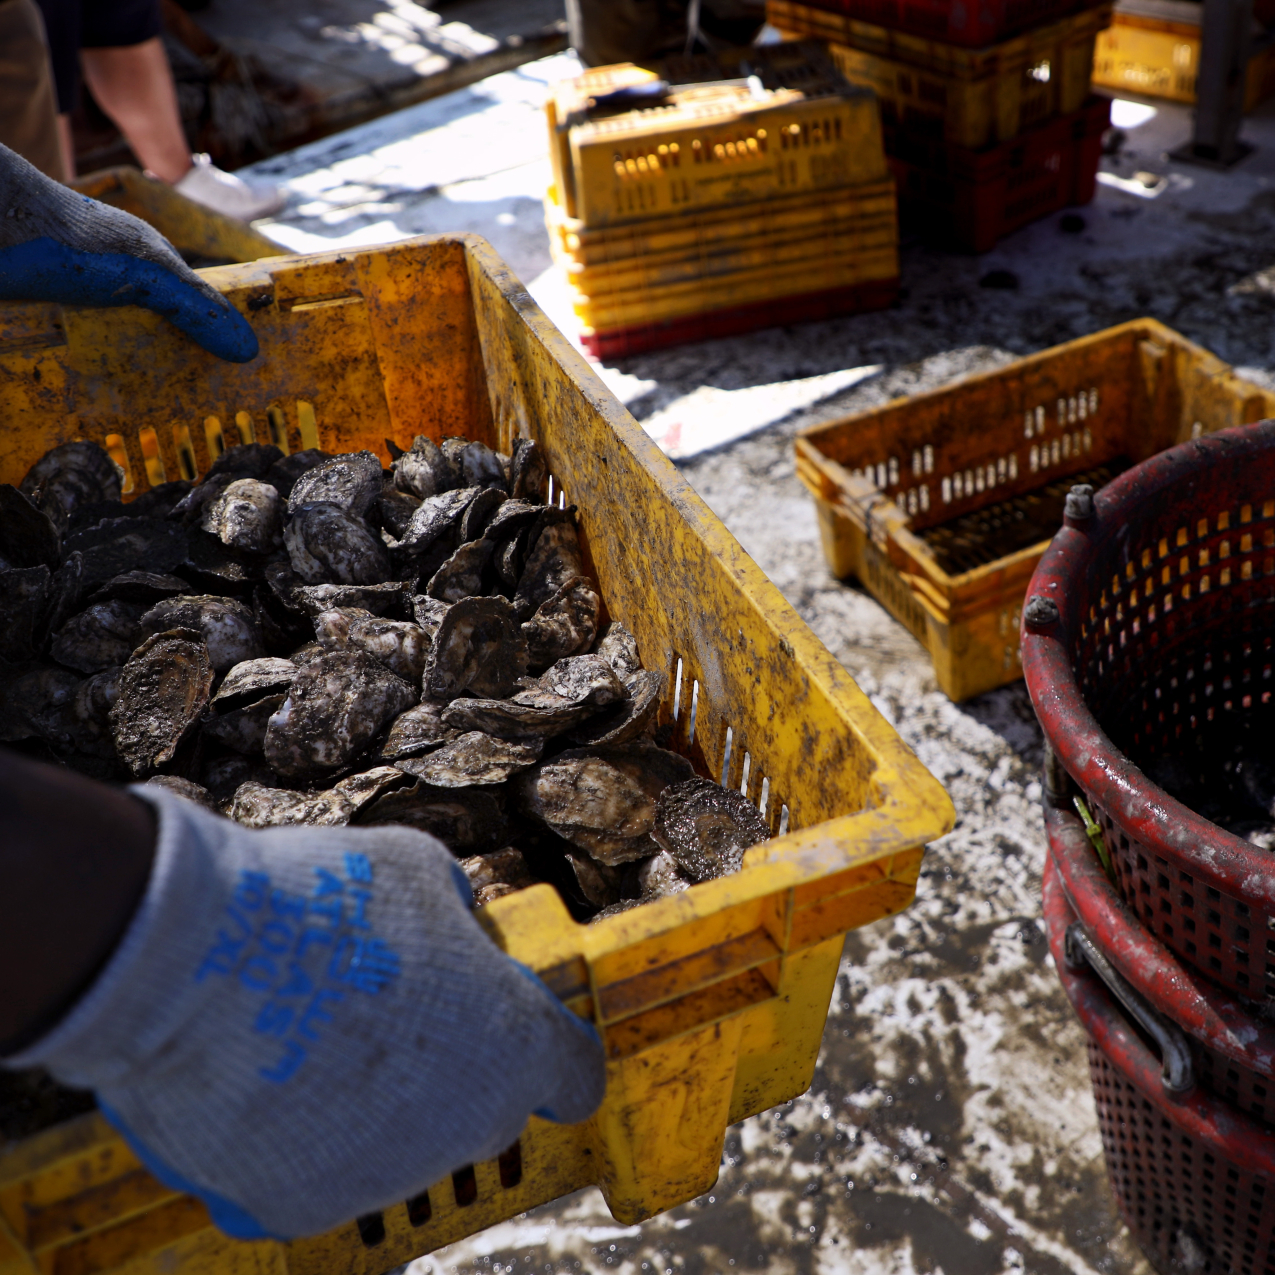 Crates of different sizes filled with oysters.